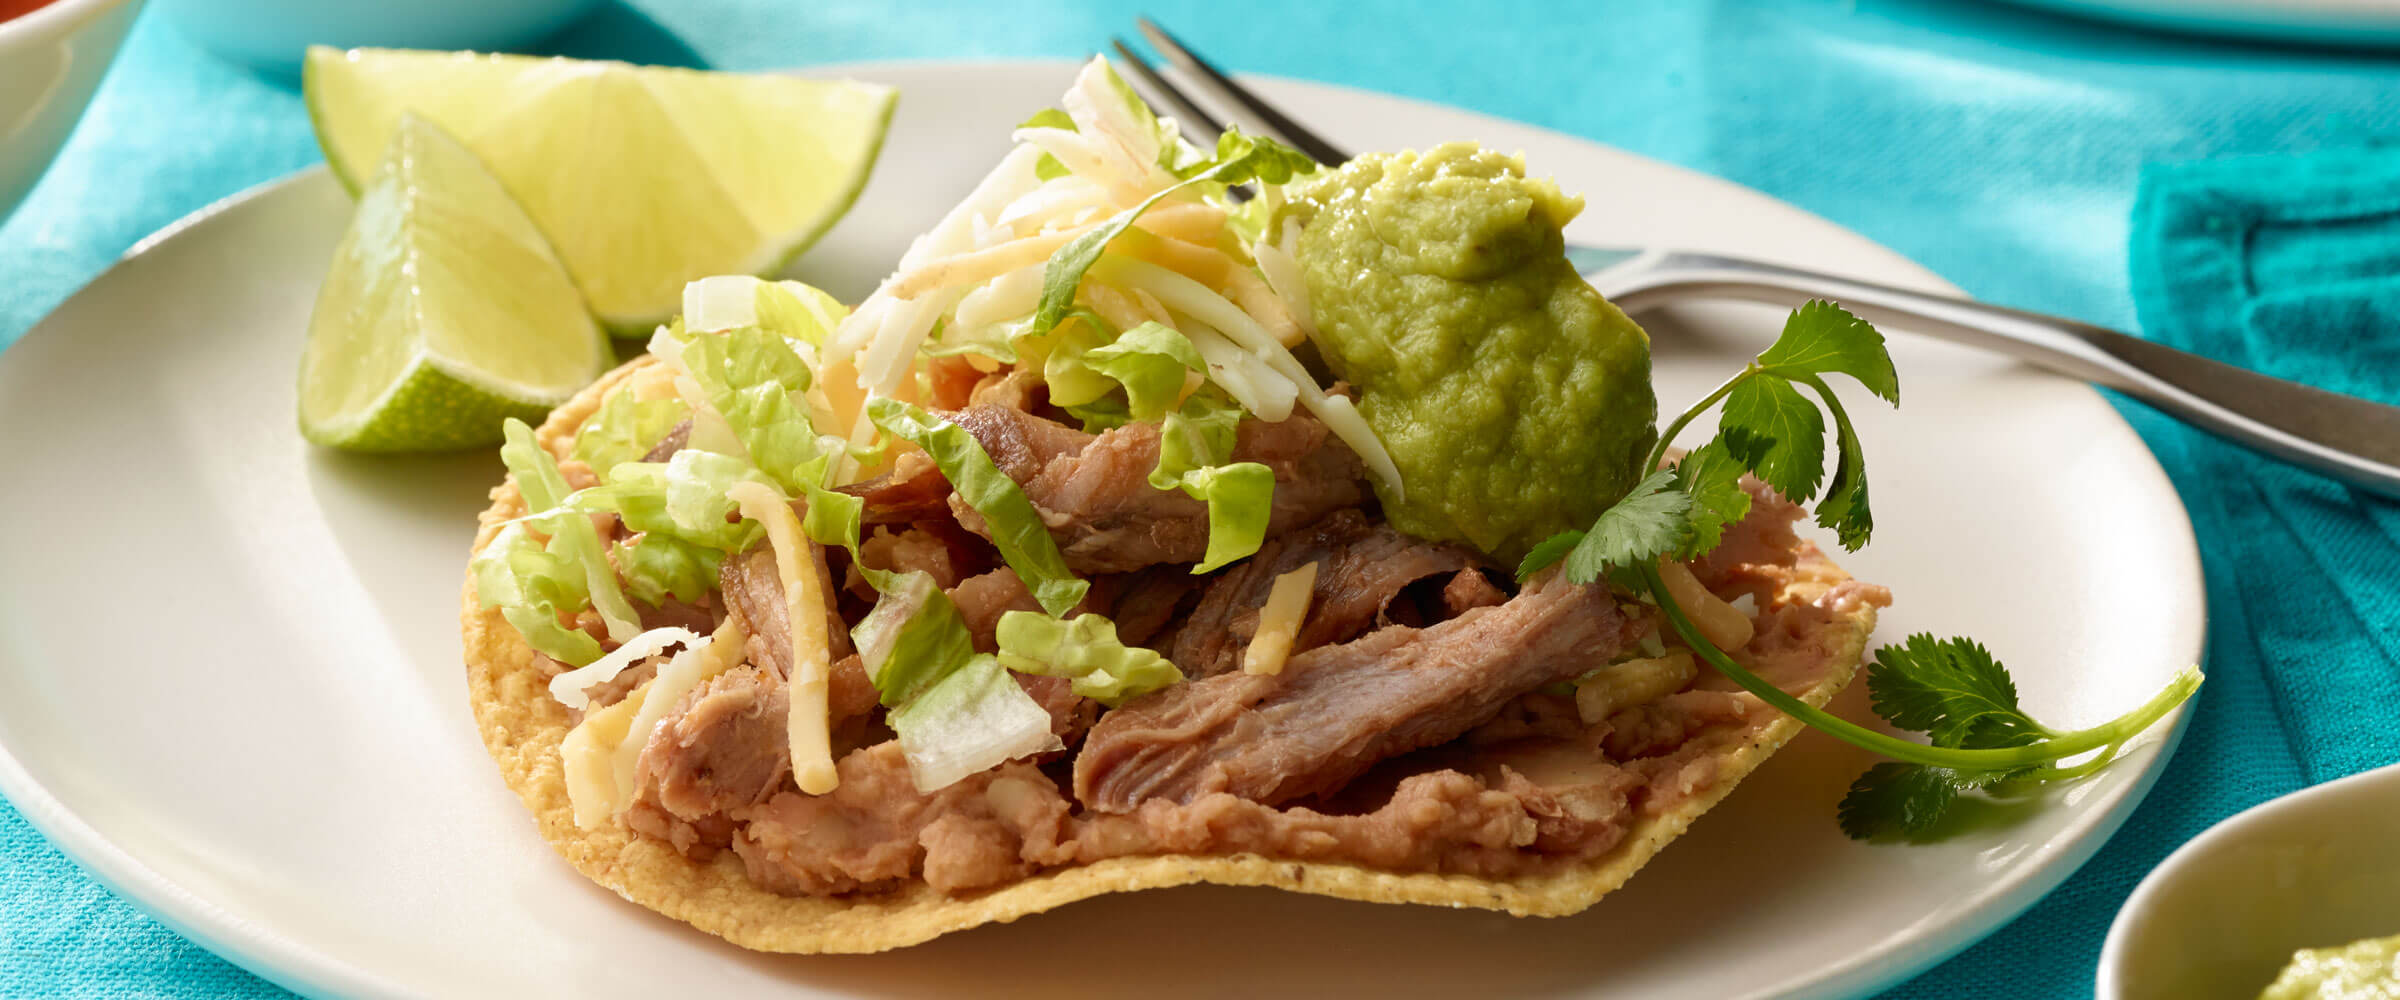 Southwestern Pork Tostadas topped with cheese, lettuce and guacamole on white plate with lime wedges